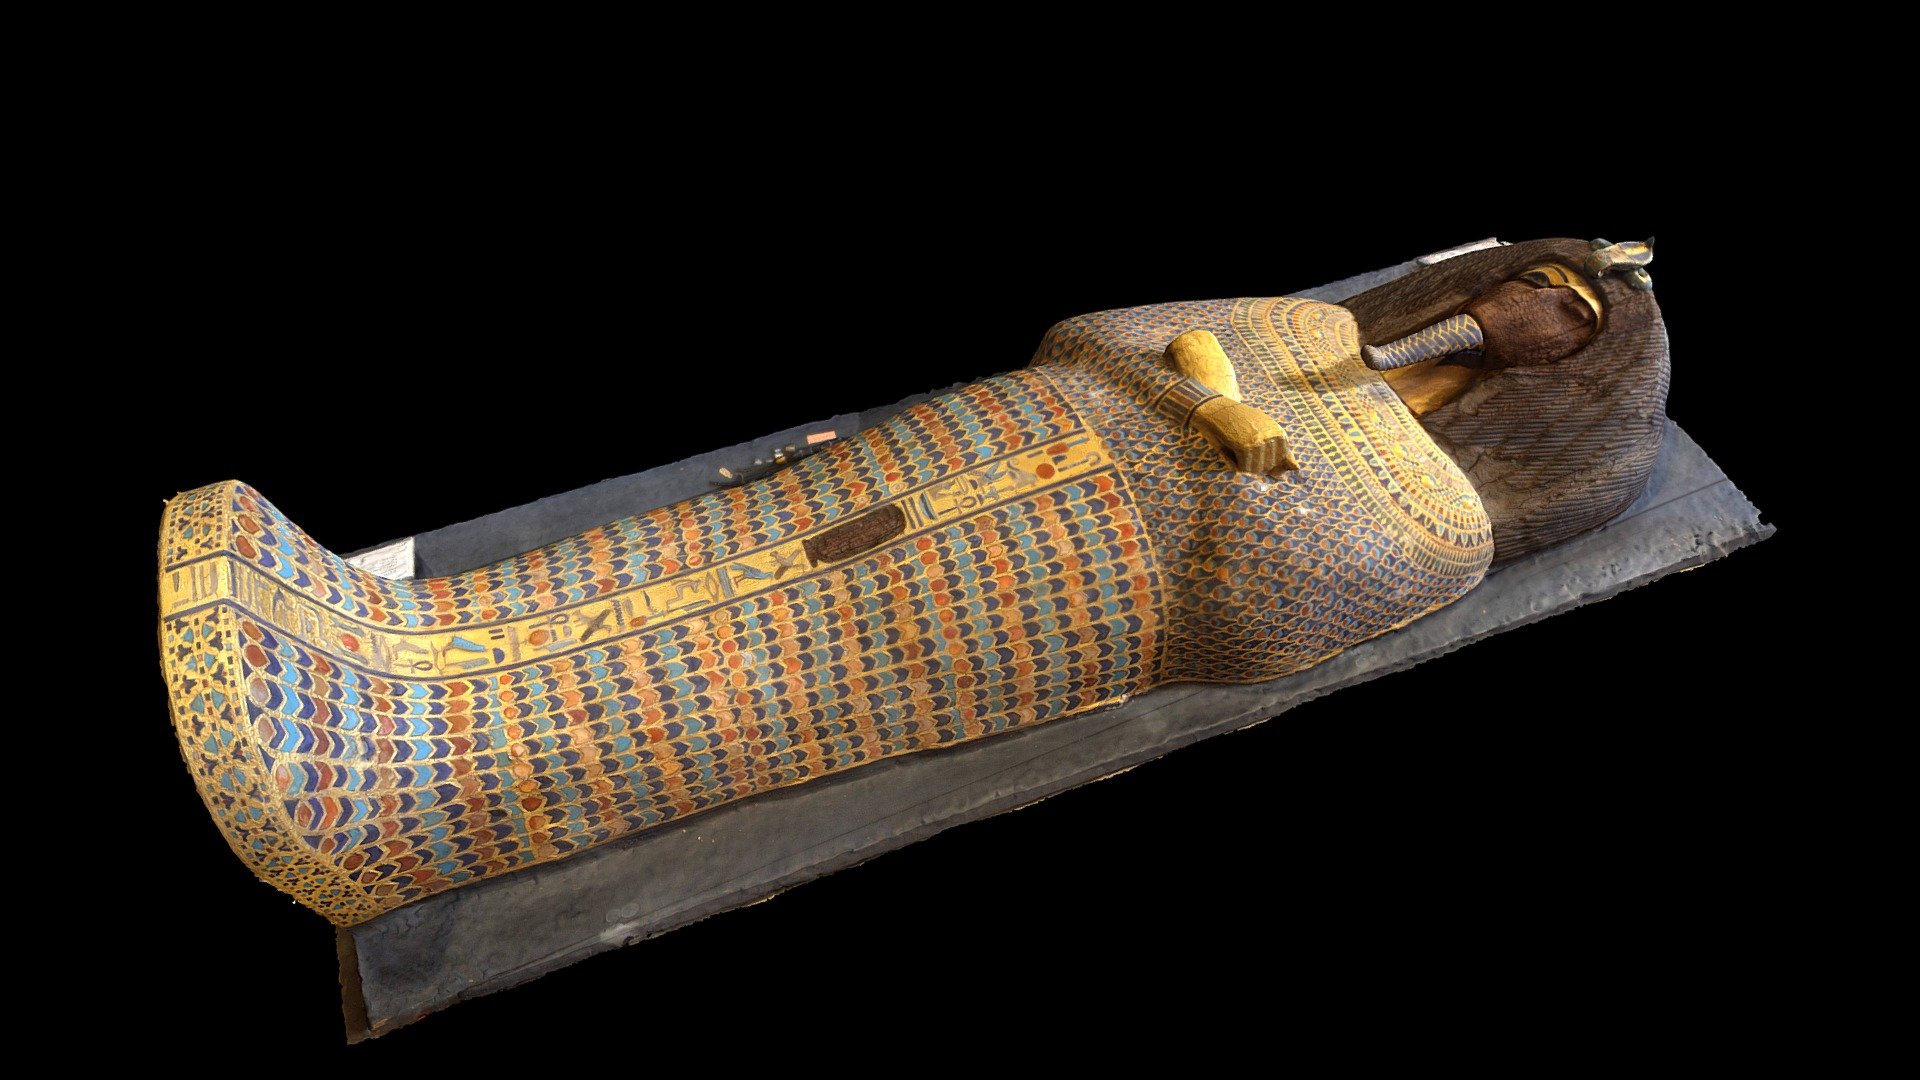 Coffin of the Pharaoh Akenaten in the Egyptian Museum, Cairo, Egypt.

This coffin was recovered from a tomb in the Valley of the Kings in what has been designated Tomb KV55.  The tomb was discovered by Edward R. Ayrton in 1907 while working for the wealthy American Theodore M. Davis.  The tomb has been controversial since it's discovery, originally being designated the burial of Queen Tiye.  It has now been shown through DNA analysis that the remains found in the tomb are those of Akenaten himself.  The DNA has further demonstrated that Akhenaten was the father of Tutankhamen (King Tut).
The face of the coffin and the name in the cartouche have been deliberately removed in an attempt to condemn the “heretic” pharaoh in the afterlife and erase his memory.

Information on the tomb can be found here.  A scan of another artifact from the tomb can be seen here.

Created using 138 photographs (Canon EOS Rebel T5i) using Metashape 1.3 3d model